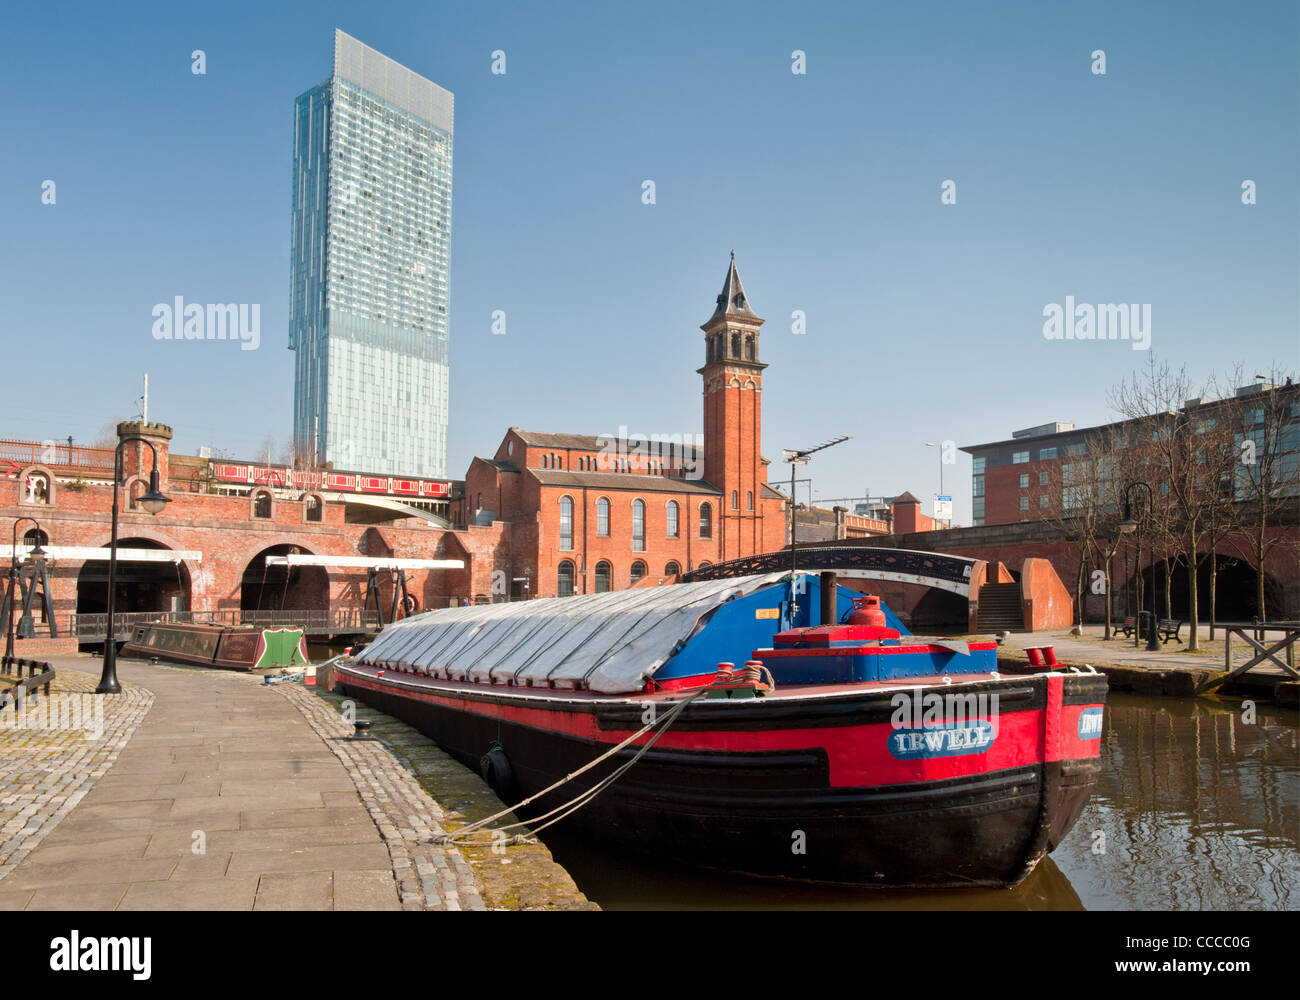 The Bridgewater Canal & Beetham Tower (Hilton Hotel), Castlefield, Manchester, England, UK Stock Photo